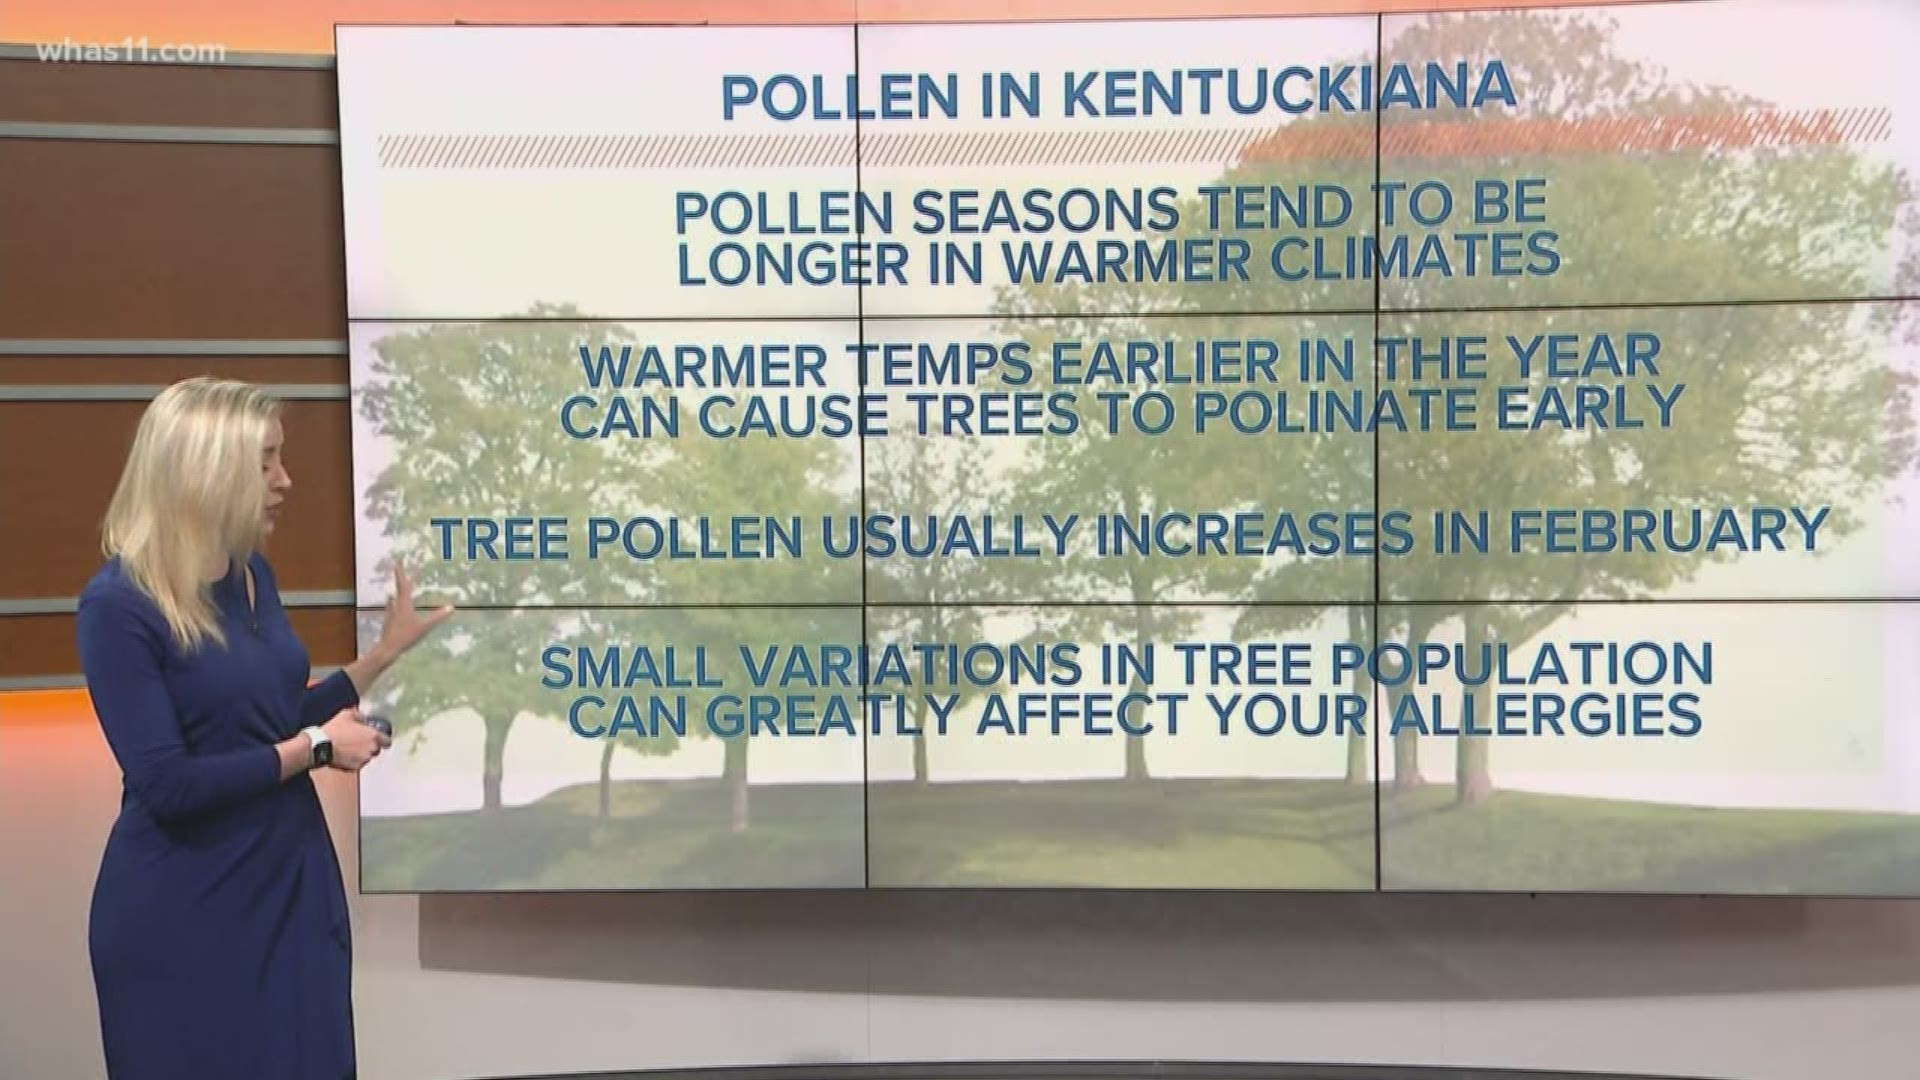 We have a large variety of trees in the Ohio Valley and a climate that allows them to grow and pollinate longer than cooler areas of the country.